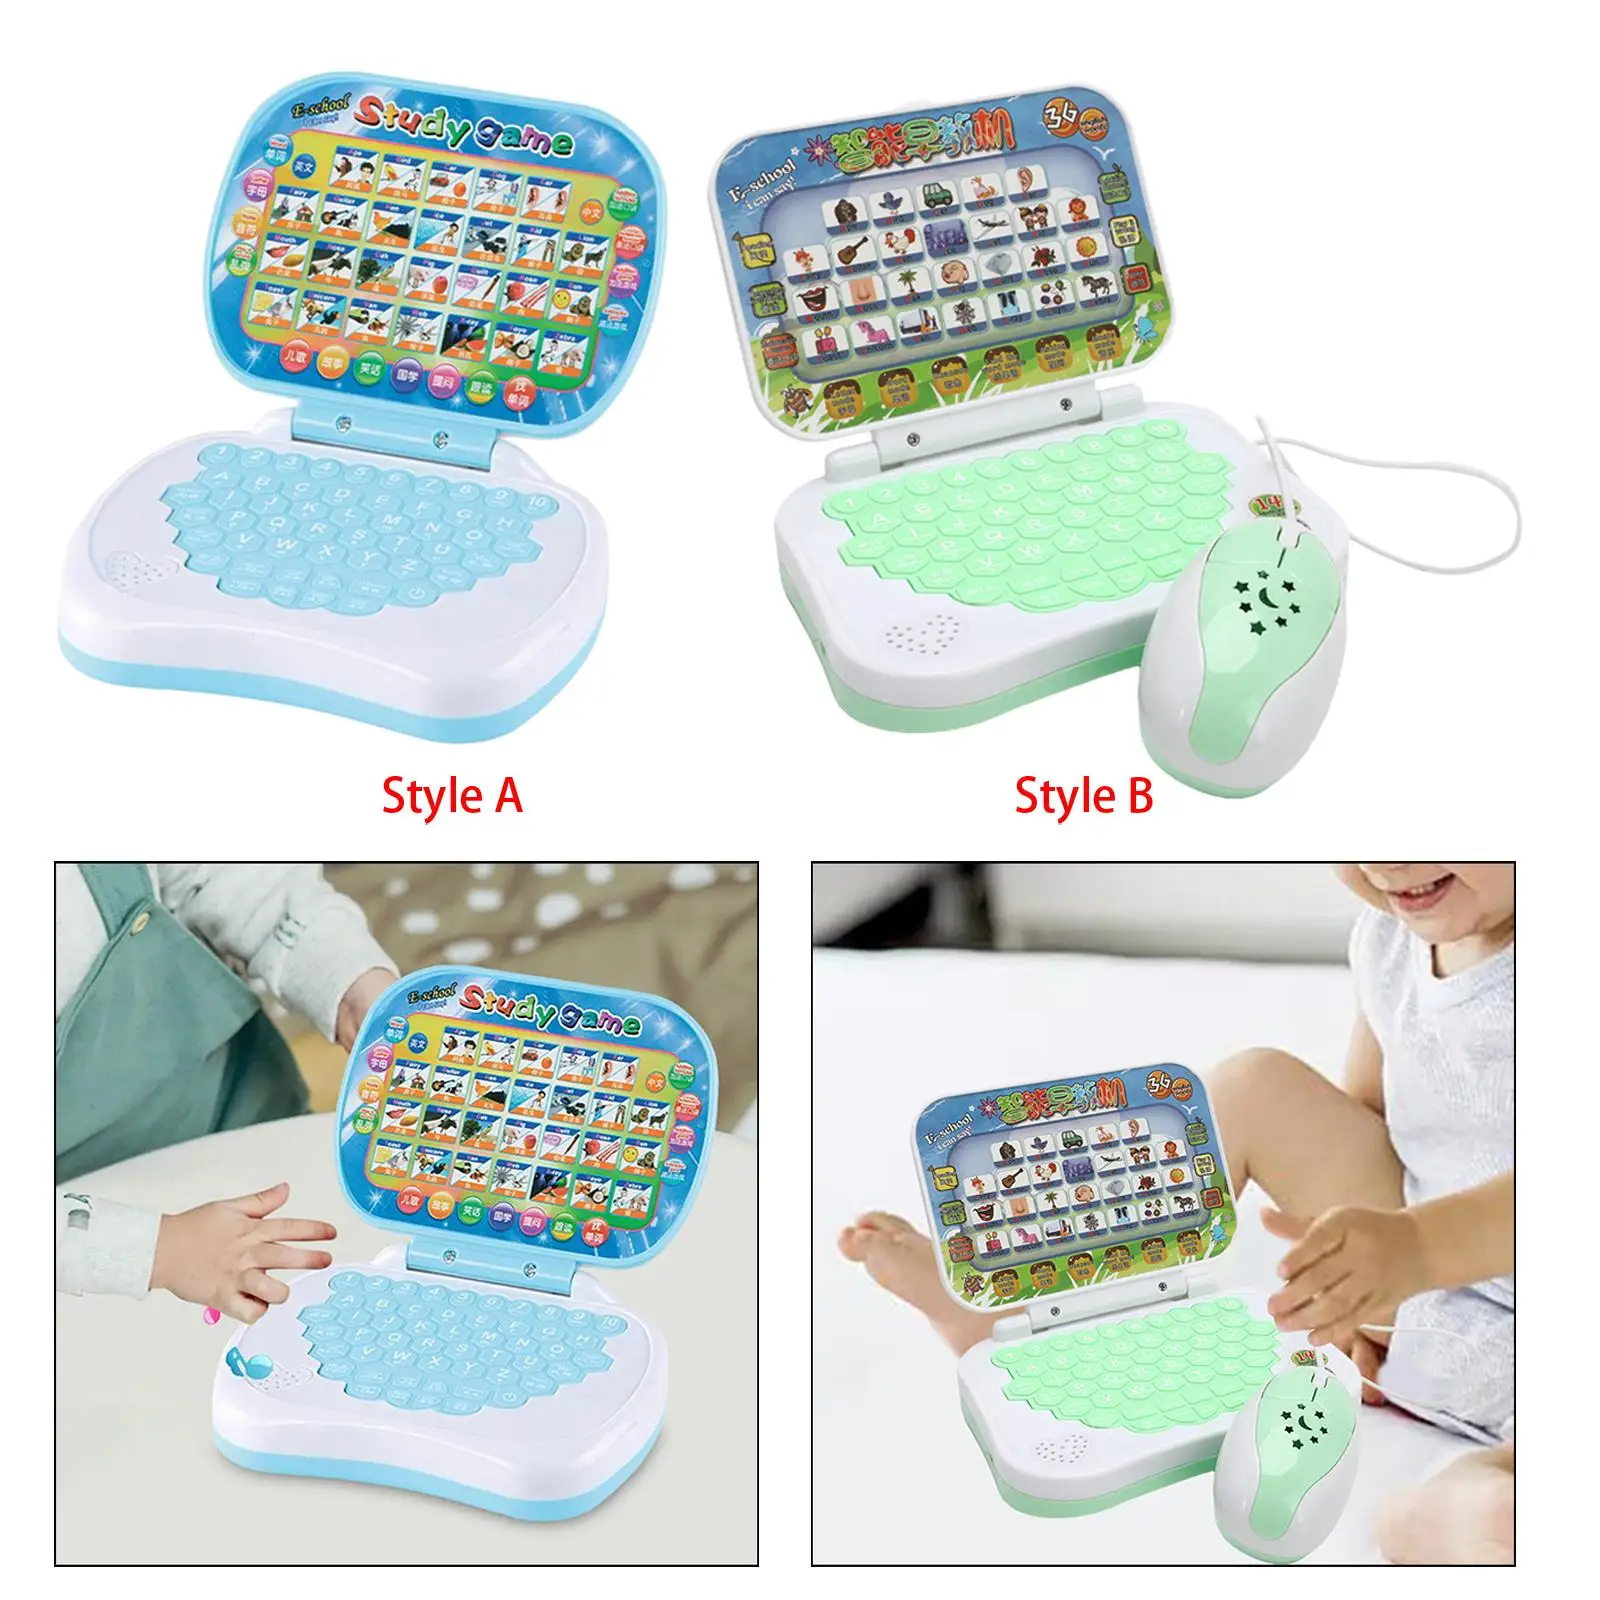 Multifunction Kids Laptop Toy Activities Study Game Computer for Girls Boys